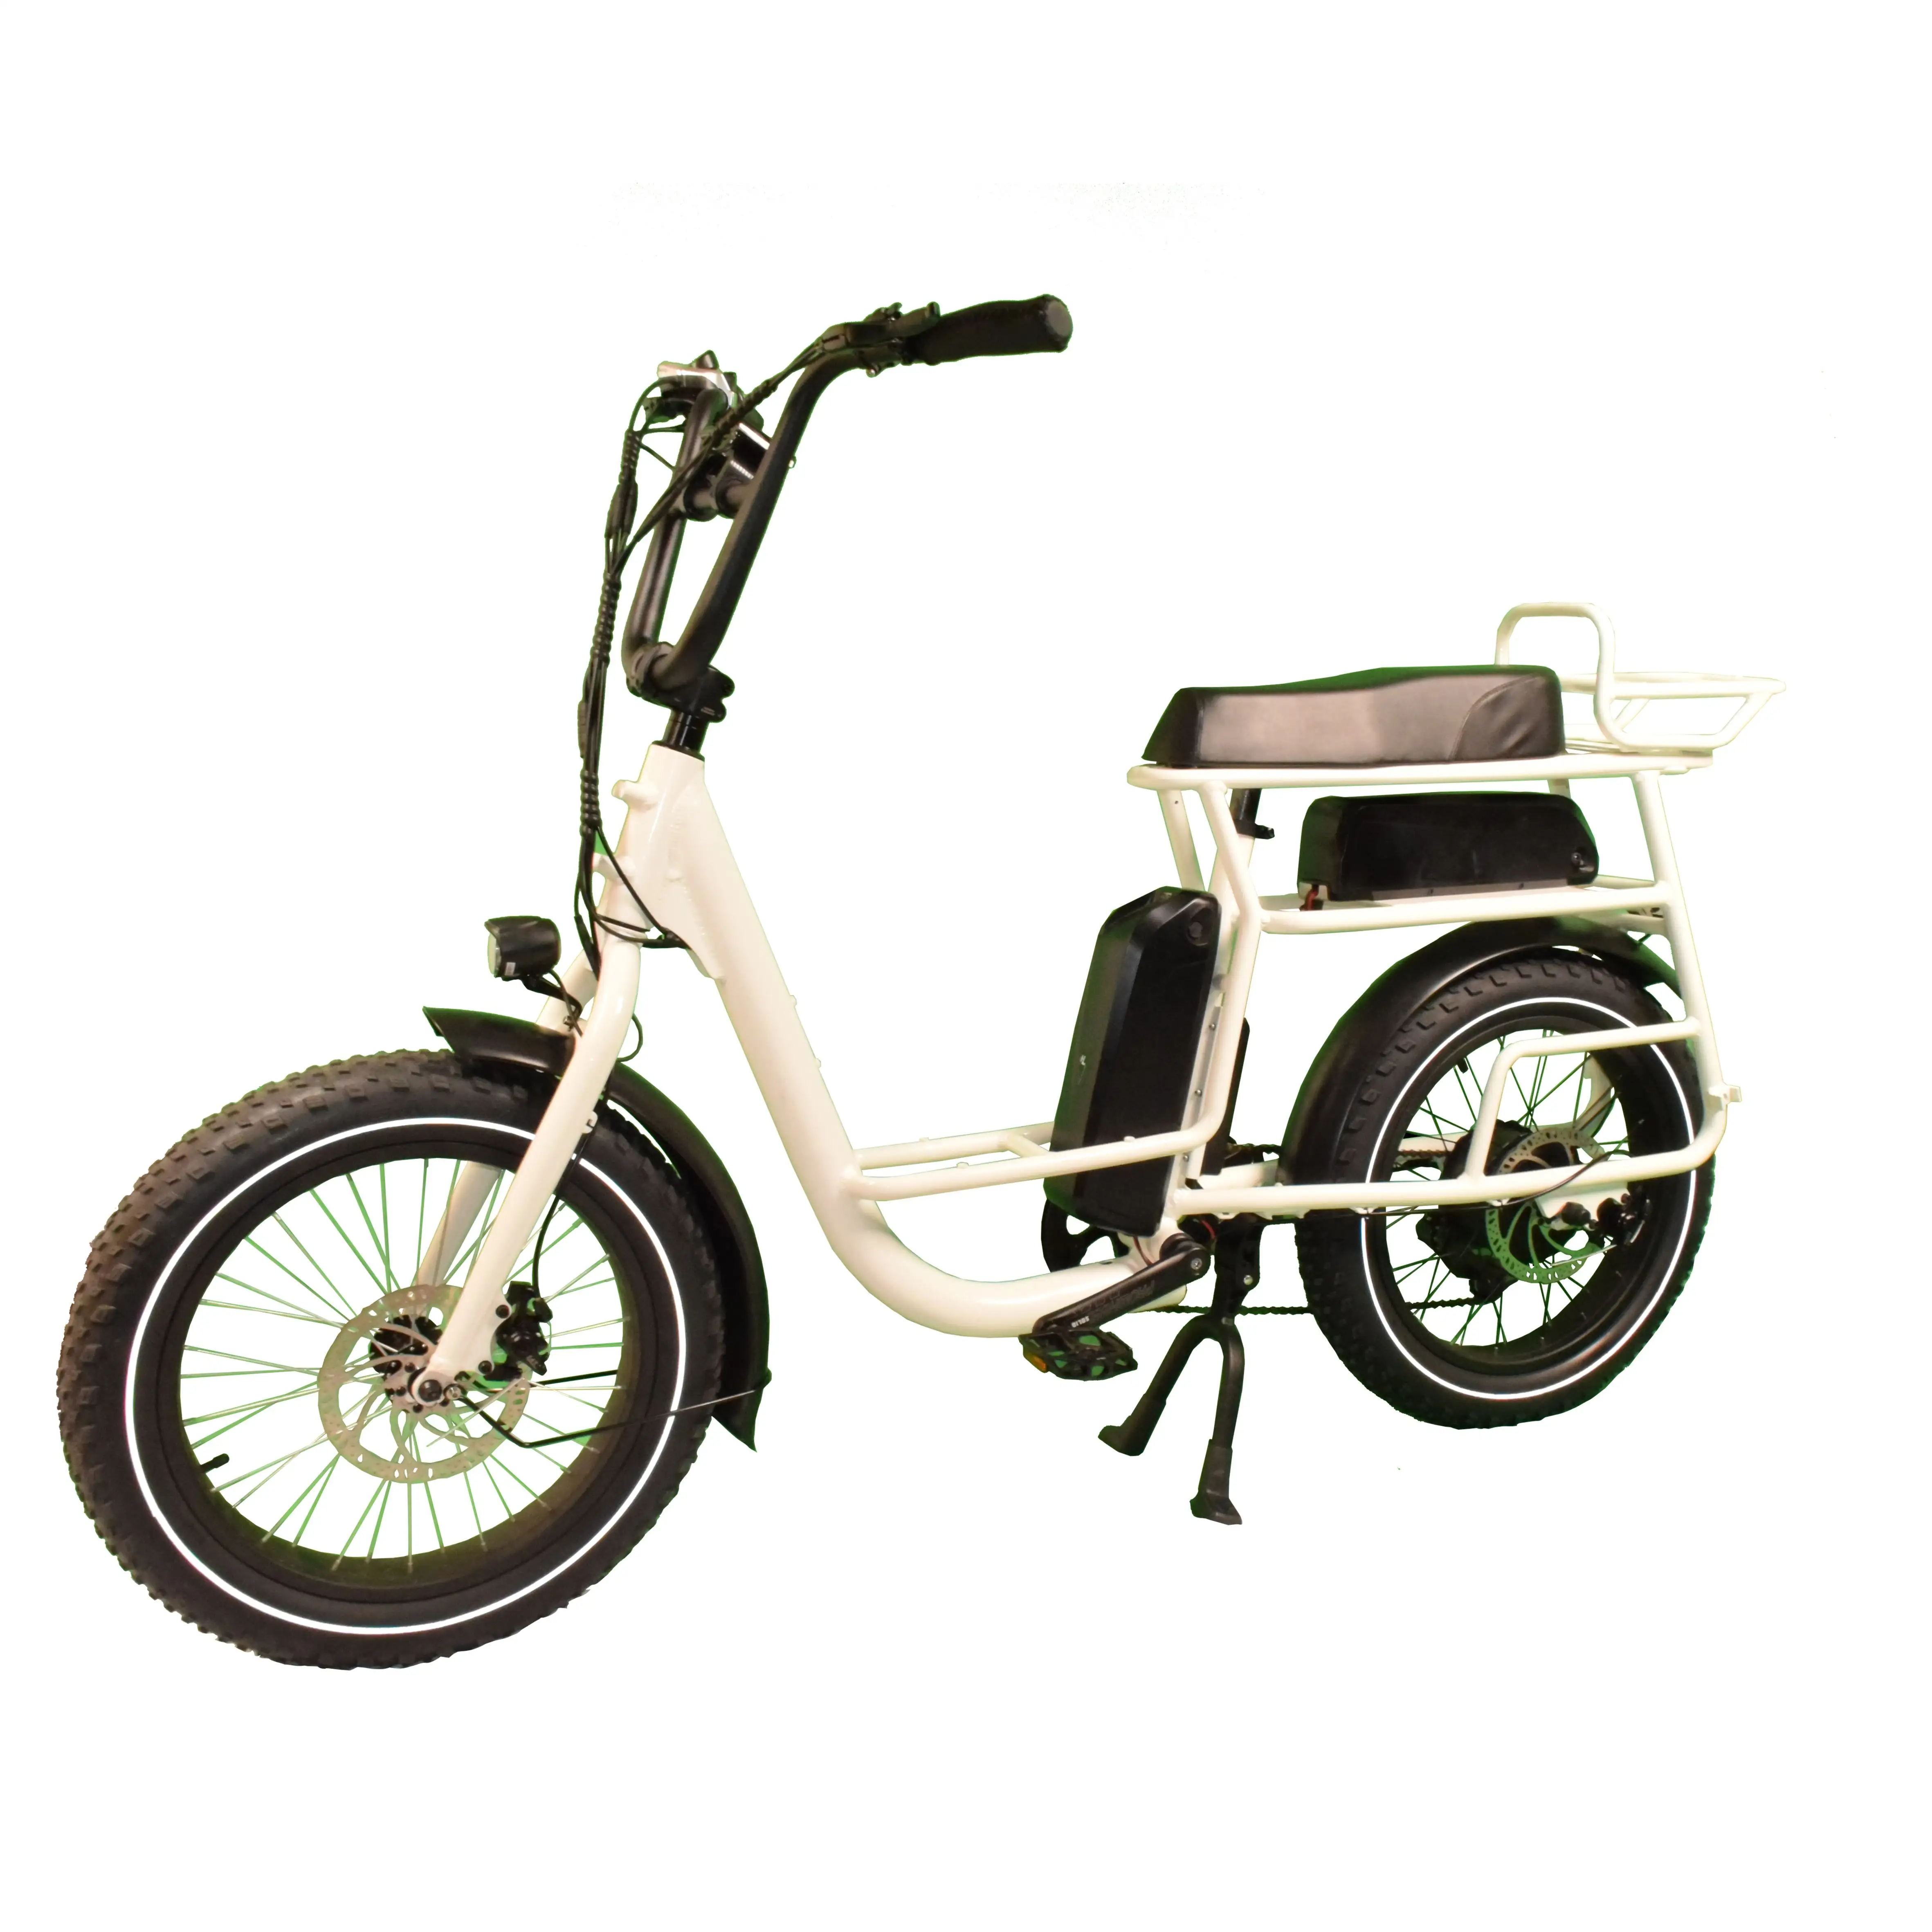 Electric Bike 750W Bicycle 20 Inch for Woman Adults Lithium Battery 60km Ready to Ship Electric Bike motorcycles lithium